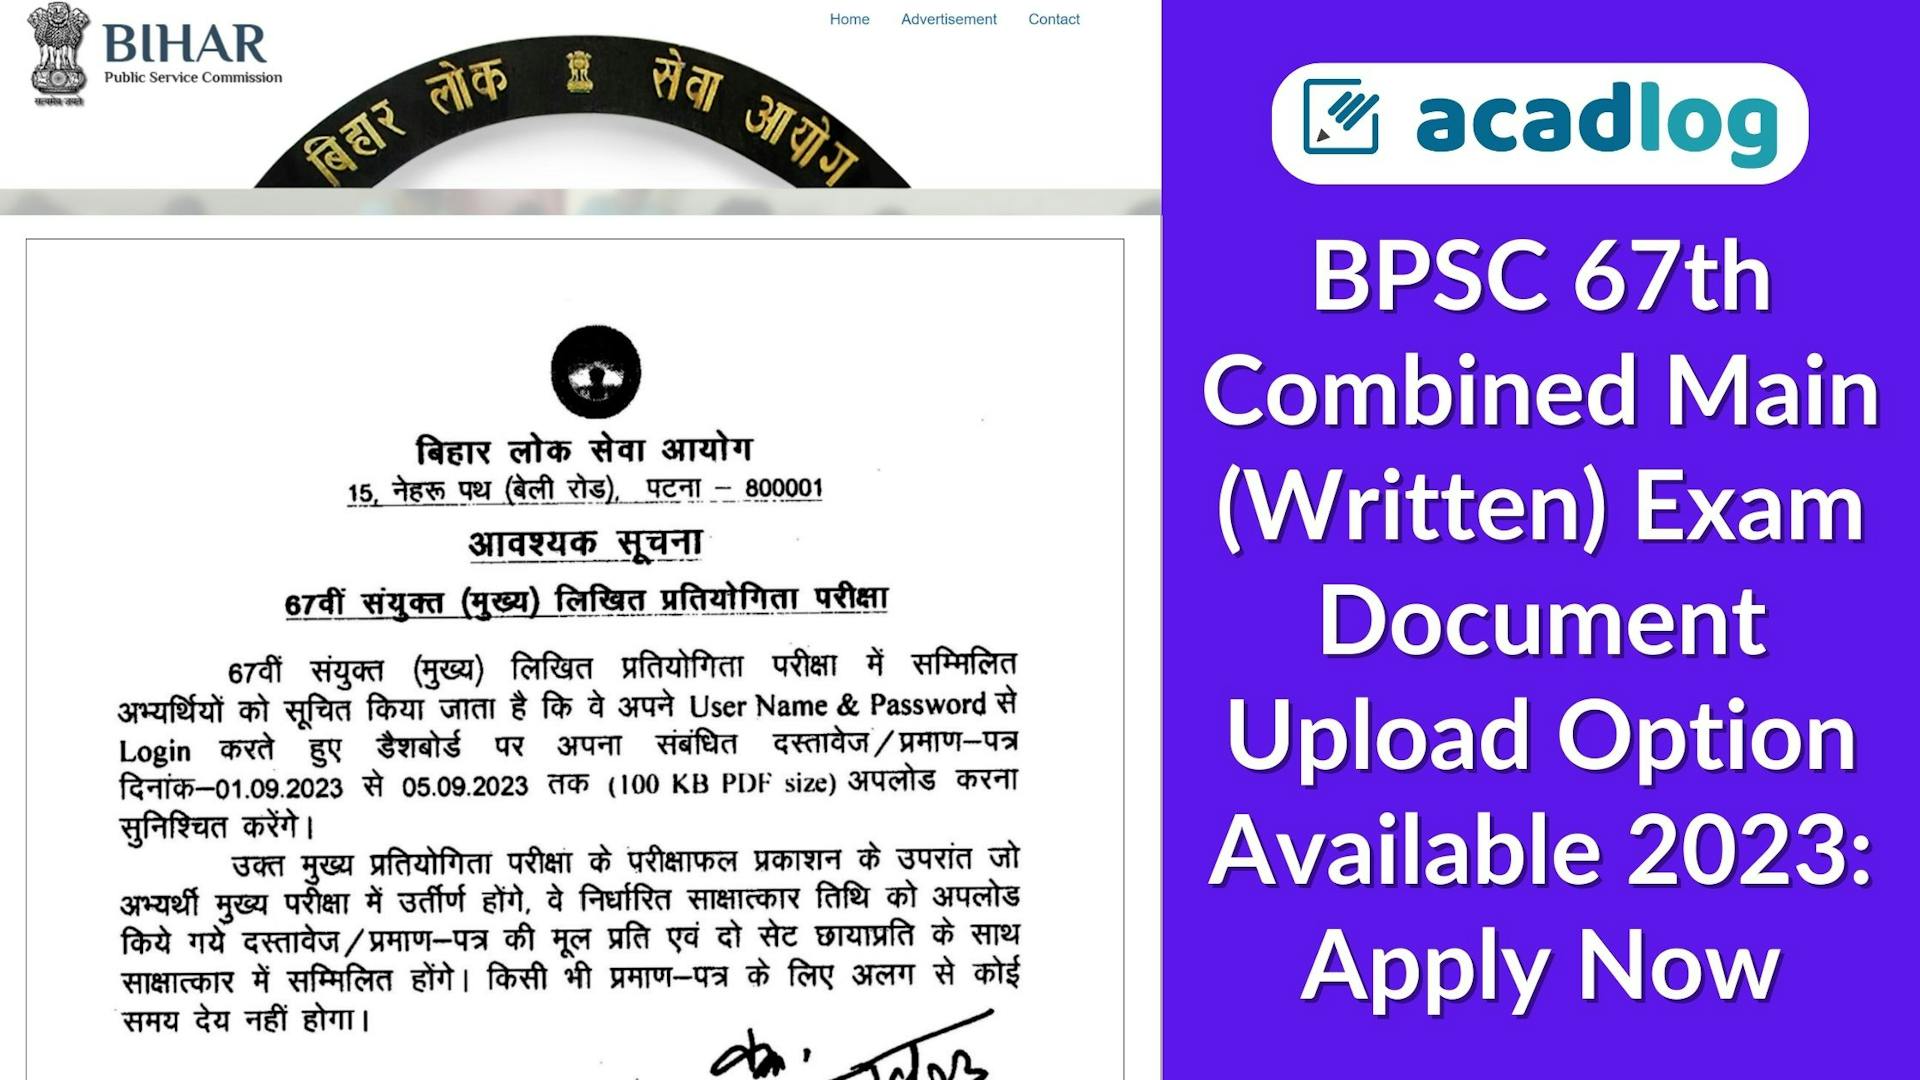 BPSC 67th Combined Main (Written) Exam Document Upload Option Available 2023: Apply Now